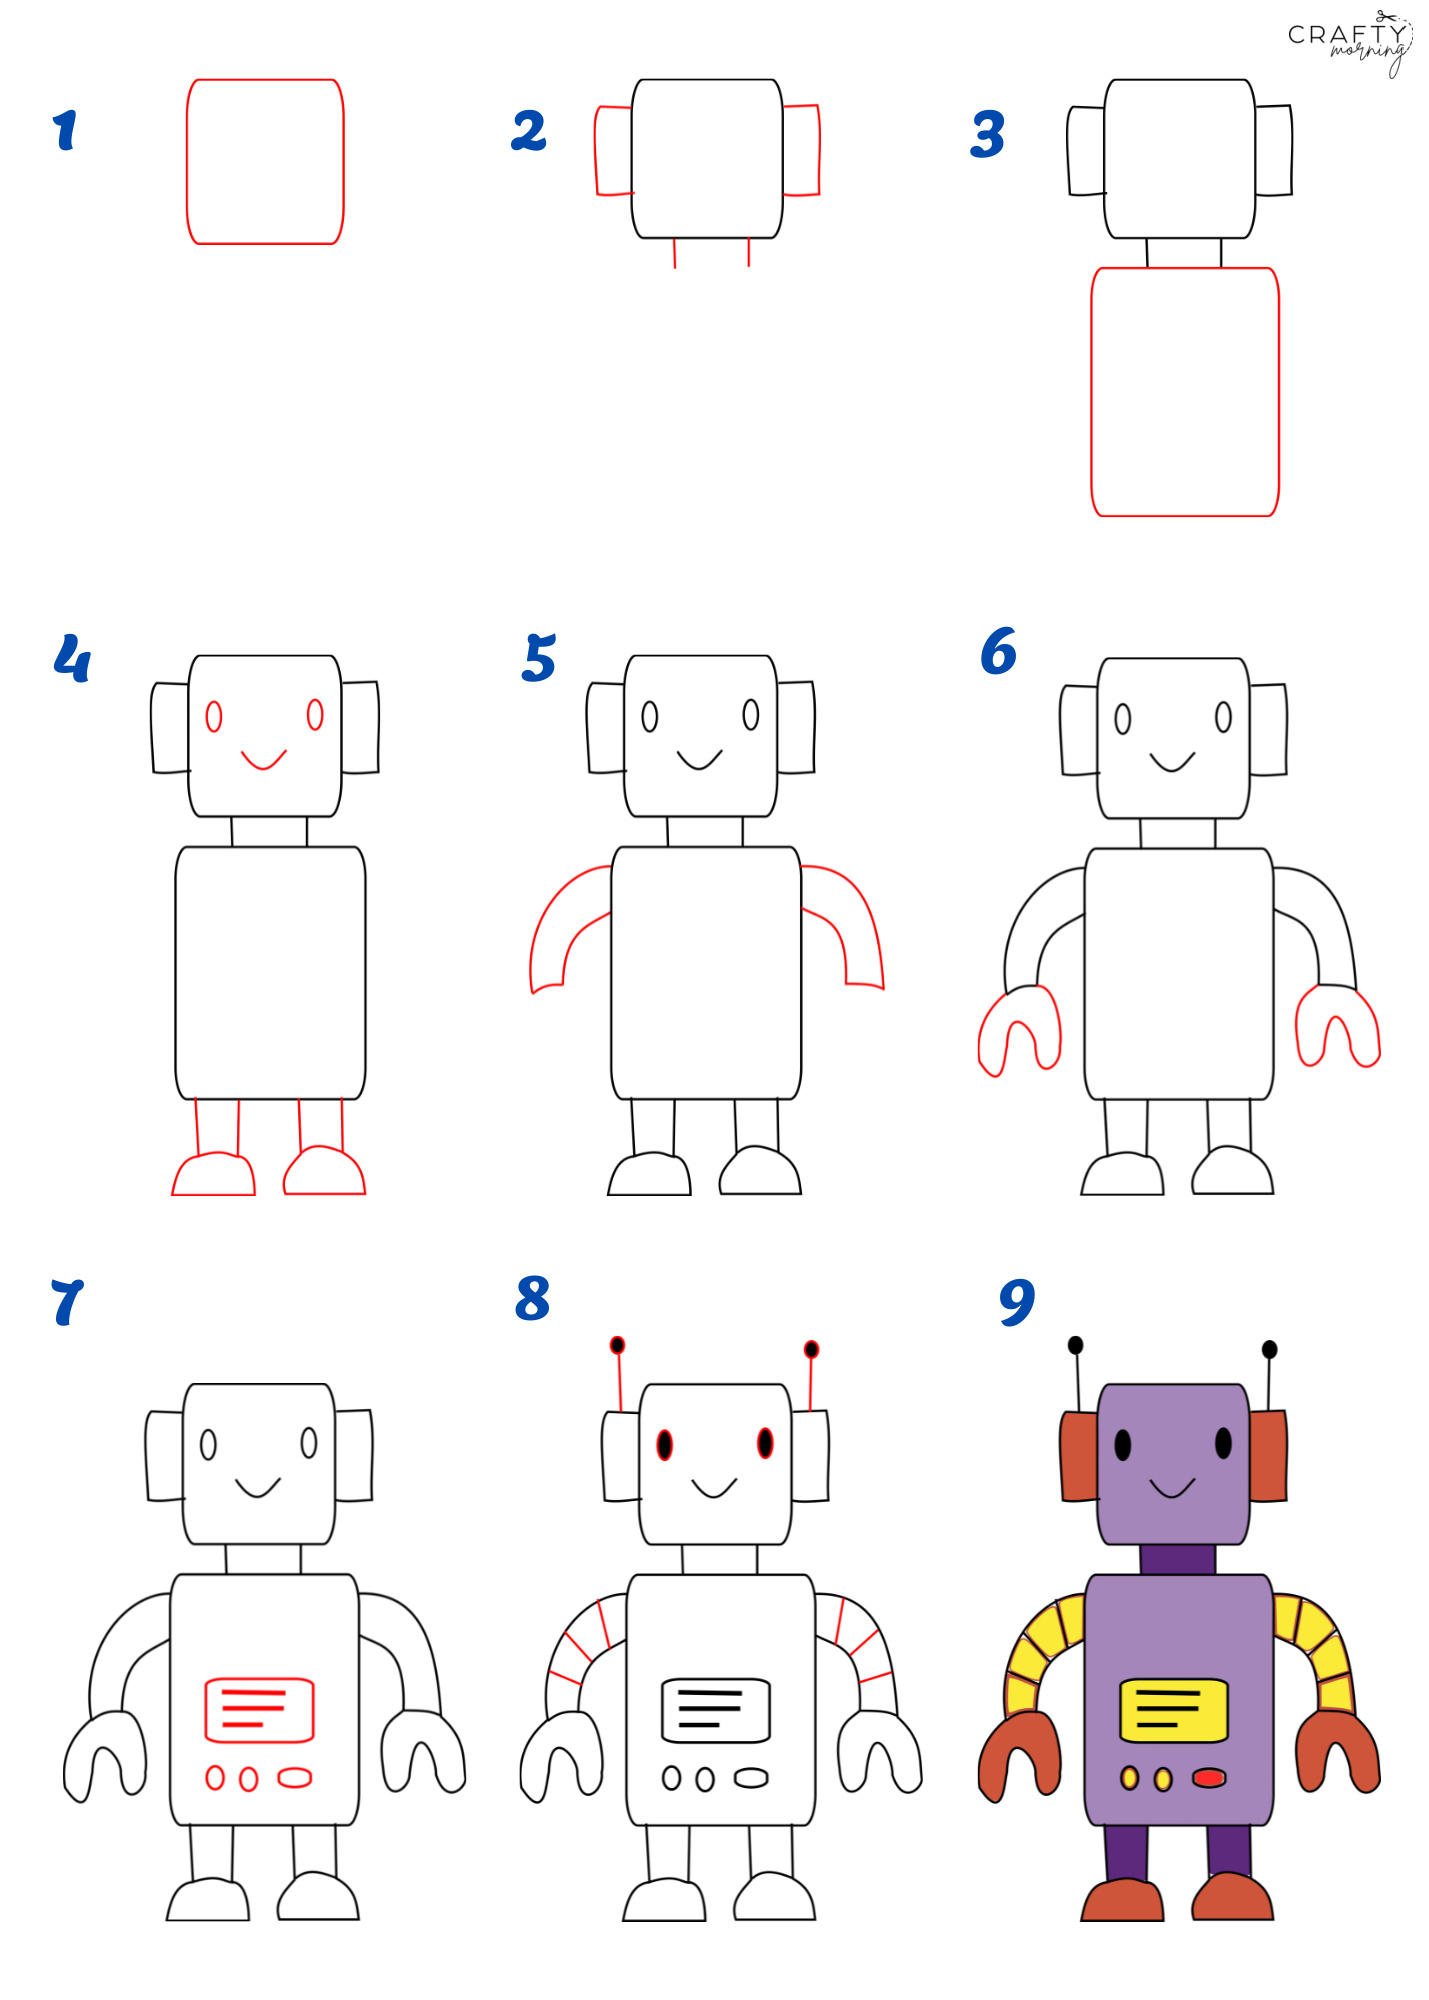 How to Draw a Robot: 2 Different Easy Ways